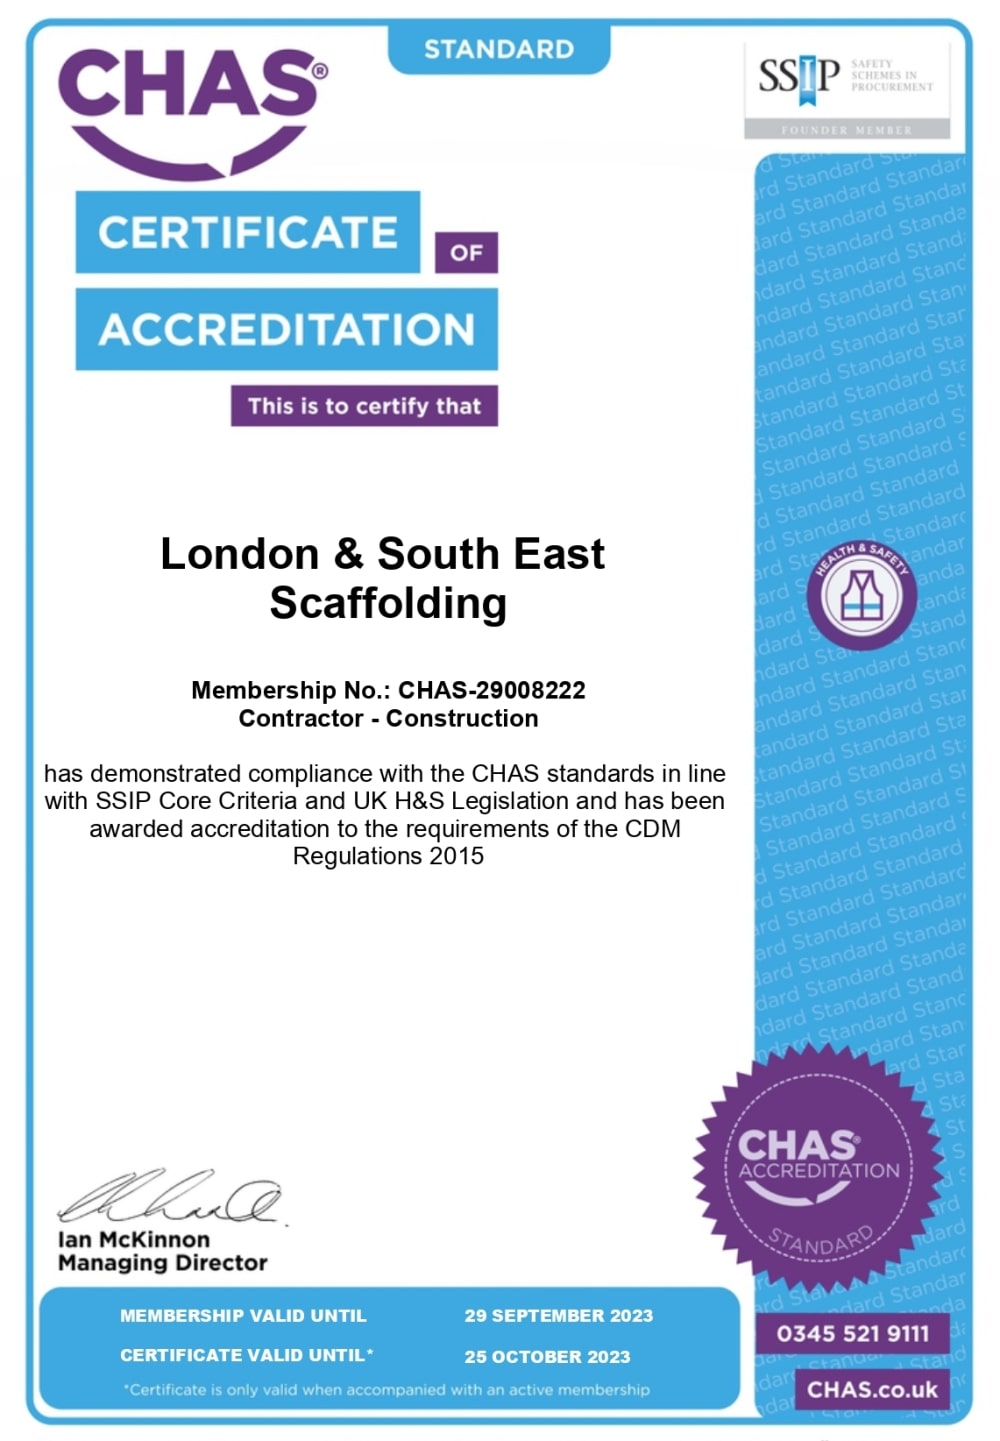 CHAS Accreditation London South East Scaffolding